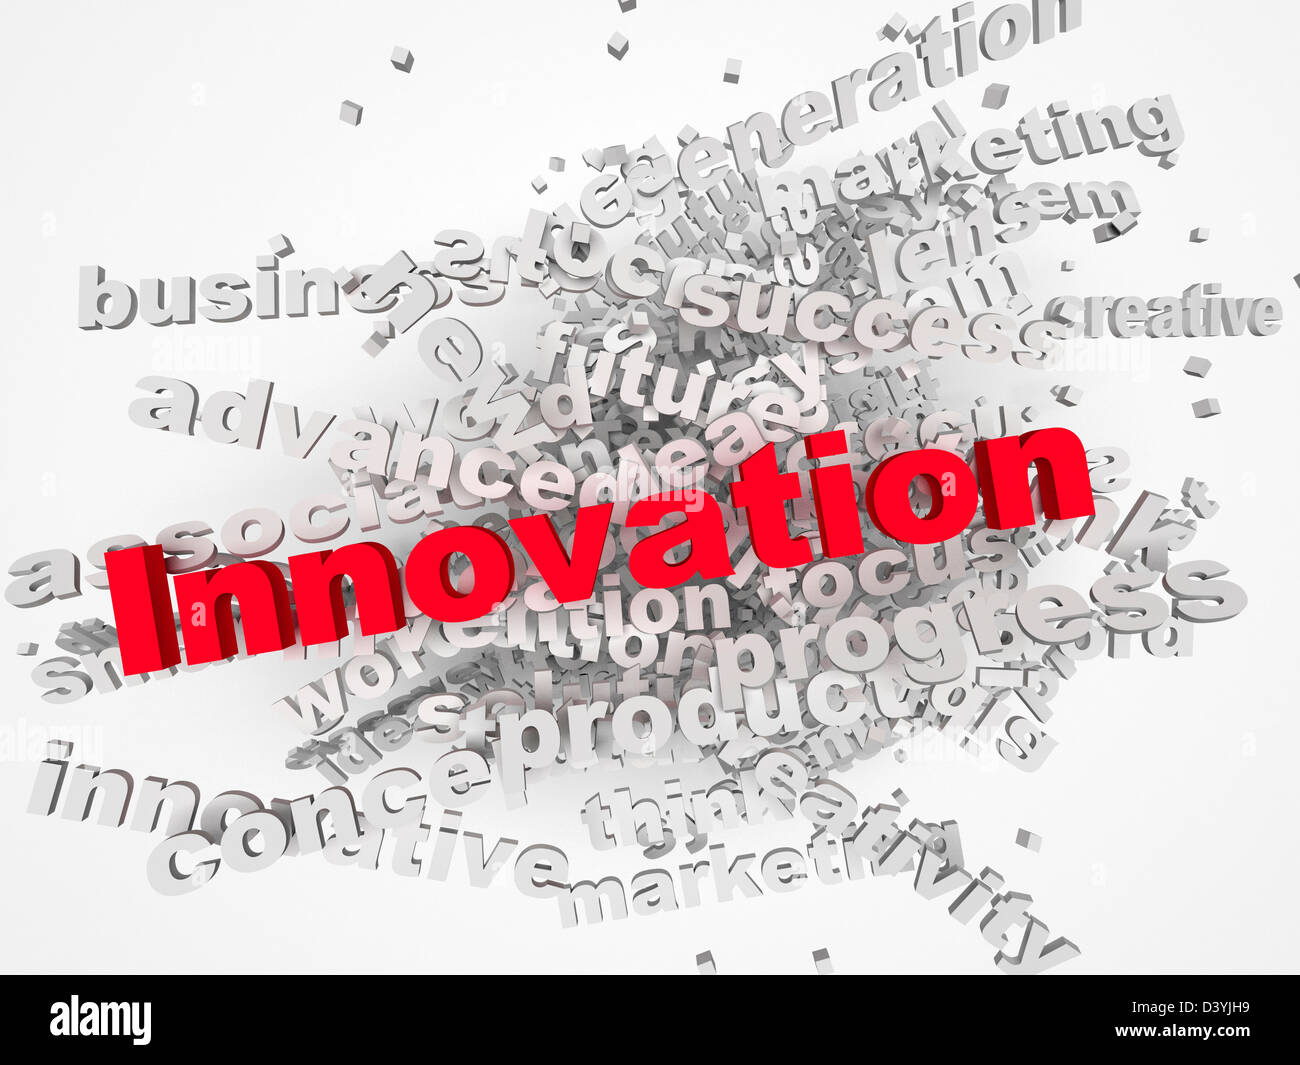 Innovate concept with other related words on retro background Stock Photo